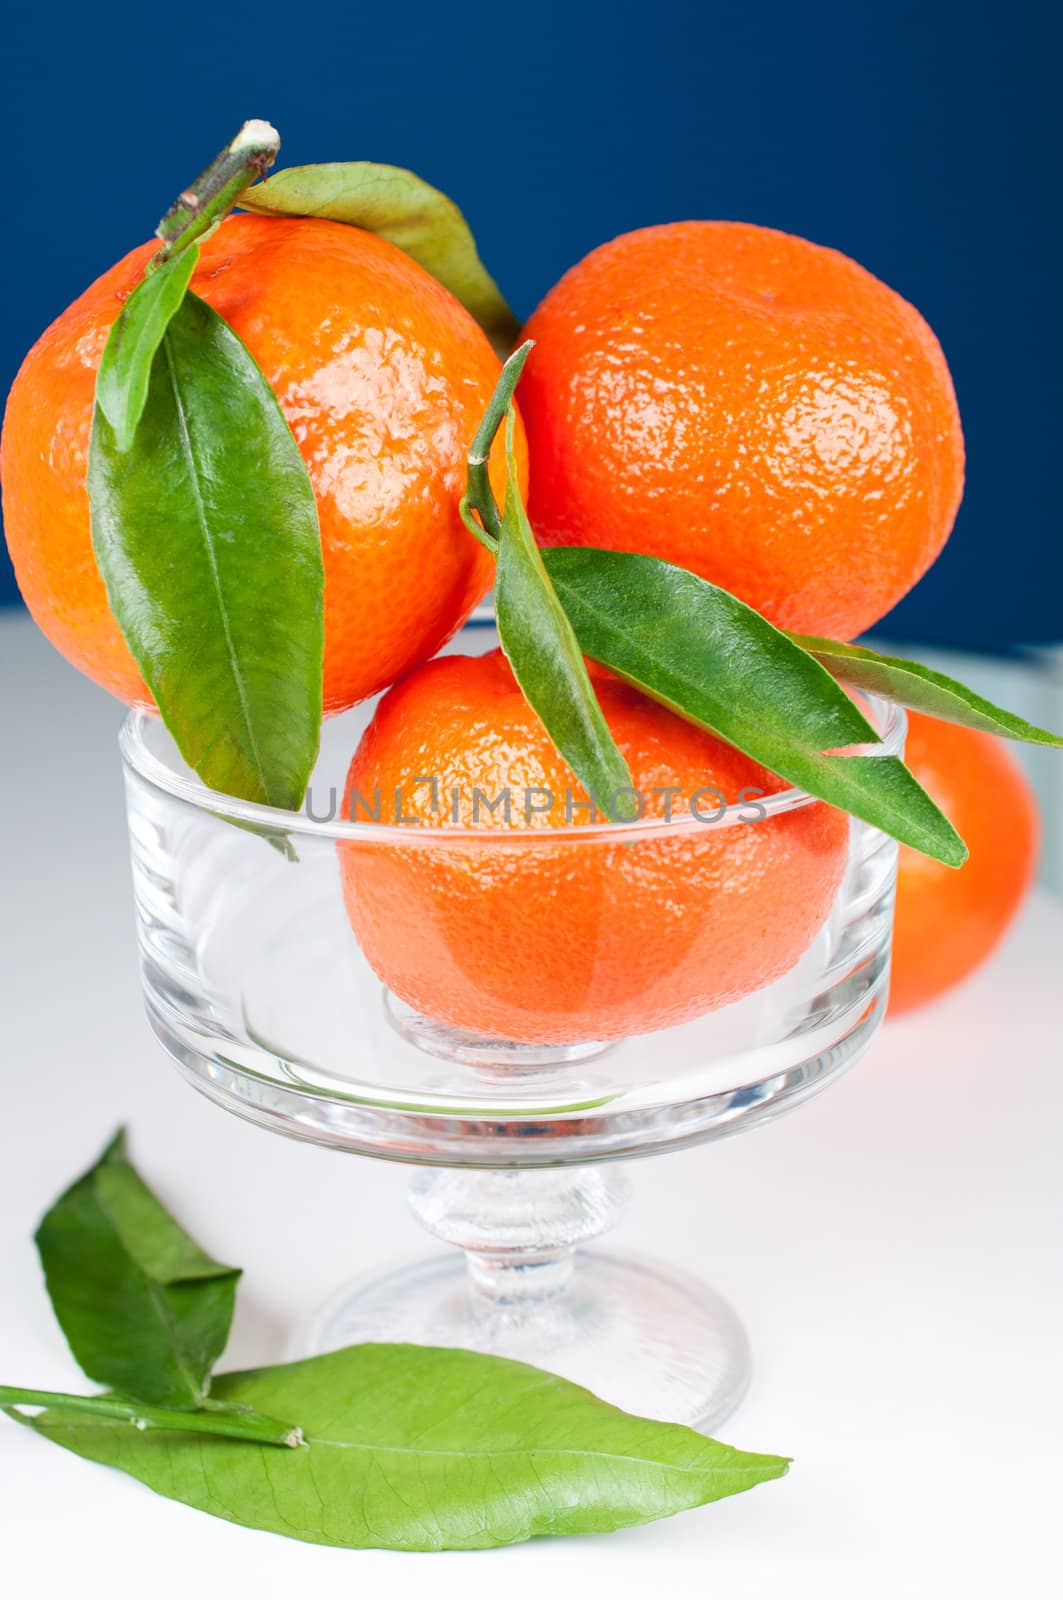 Tangerines in a glass vase on blue background